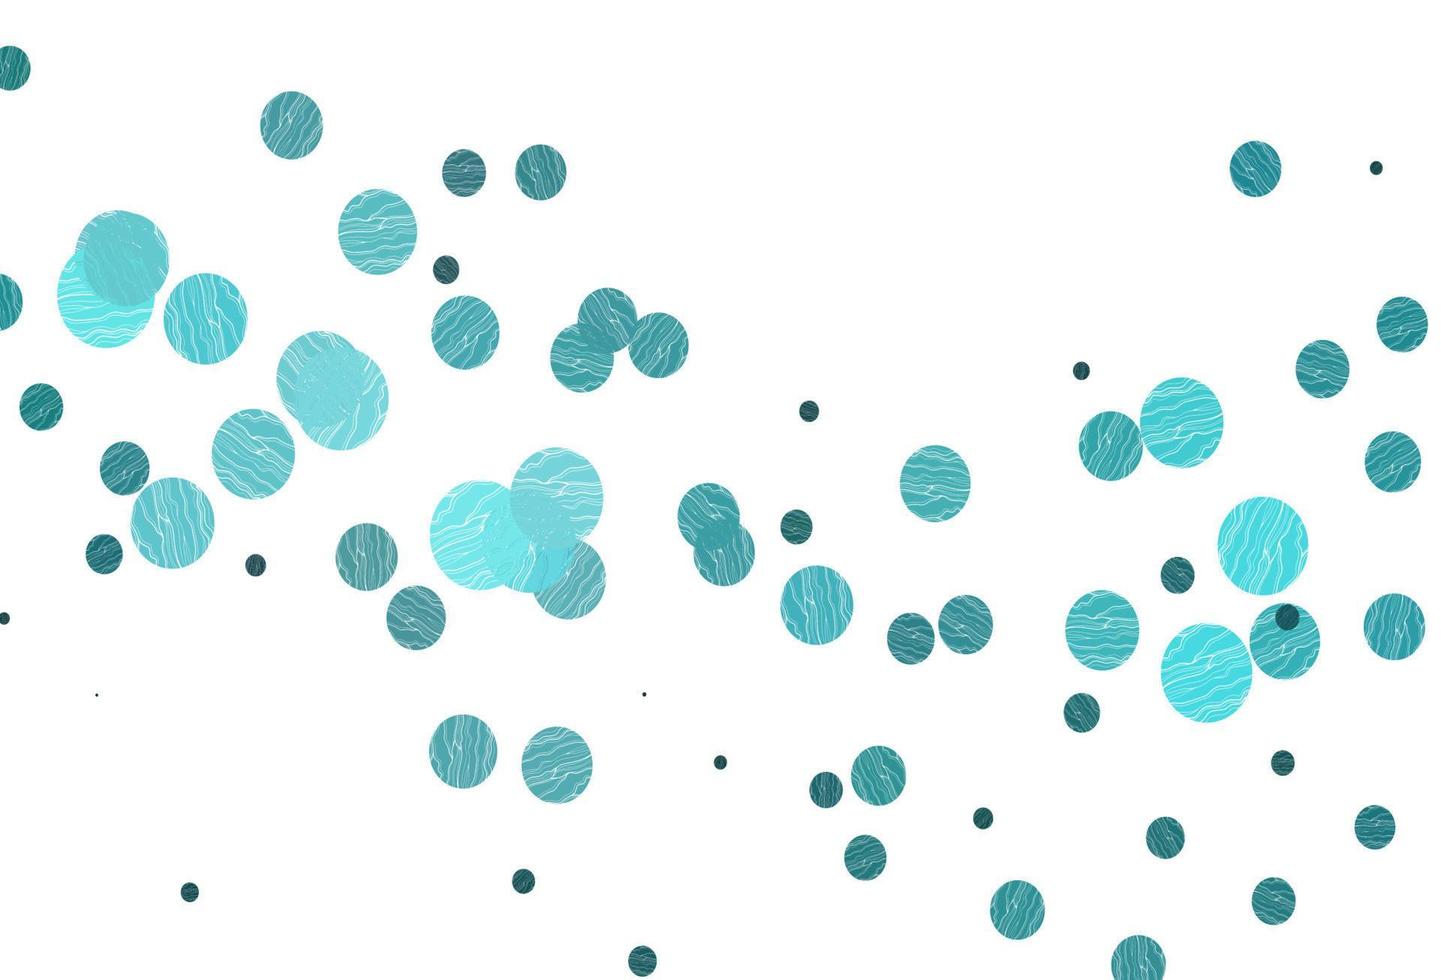 Light blue vector layout with circle shapes.